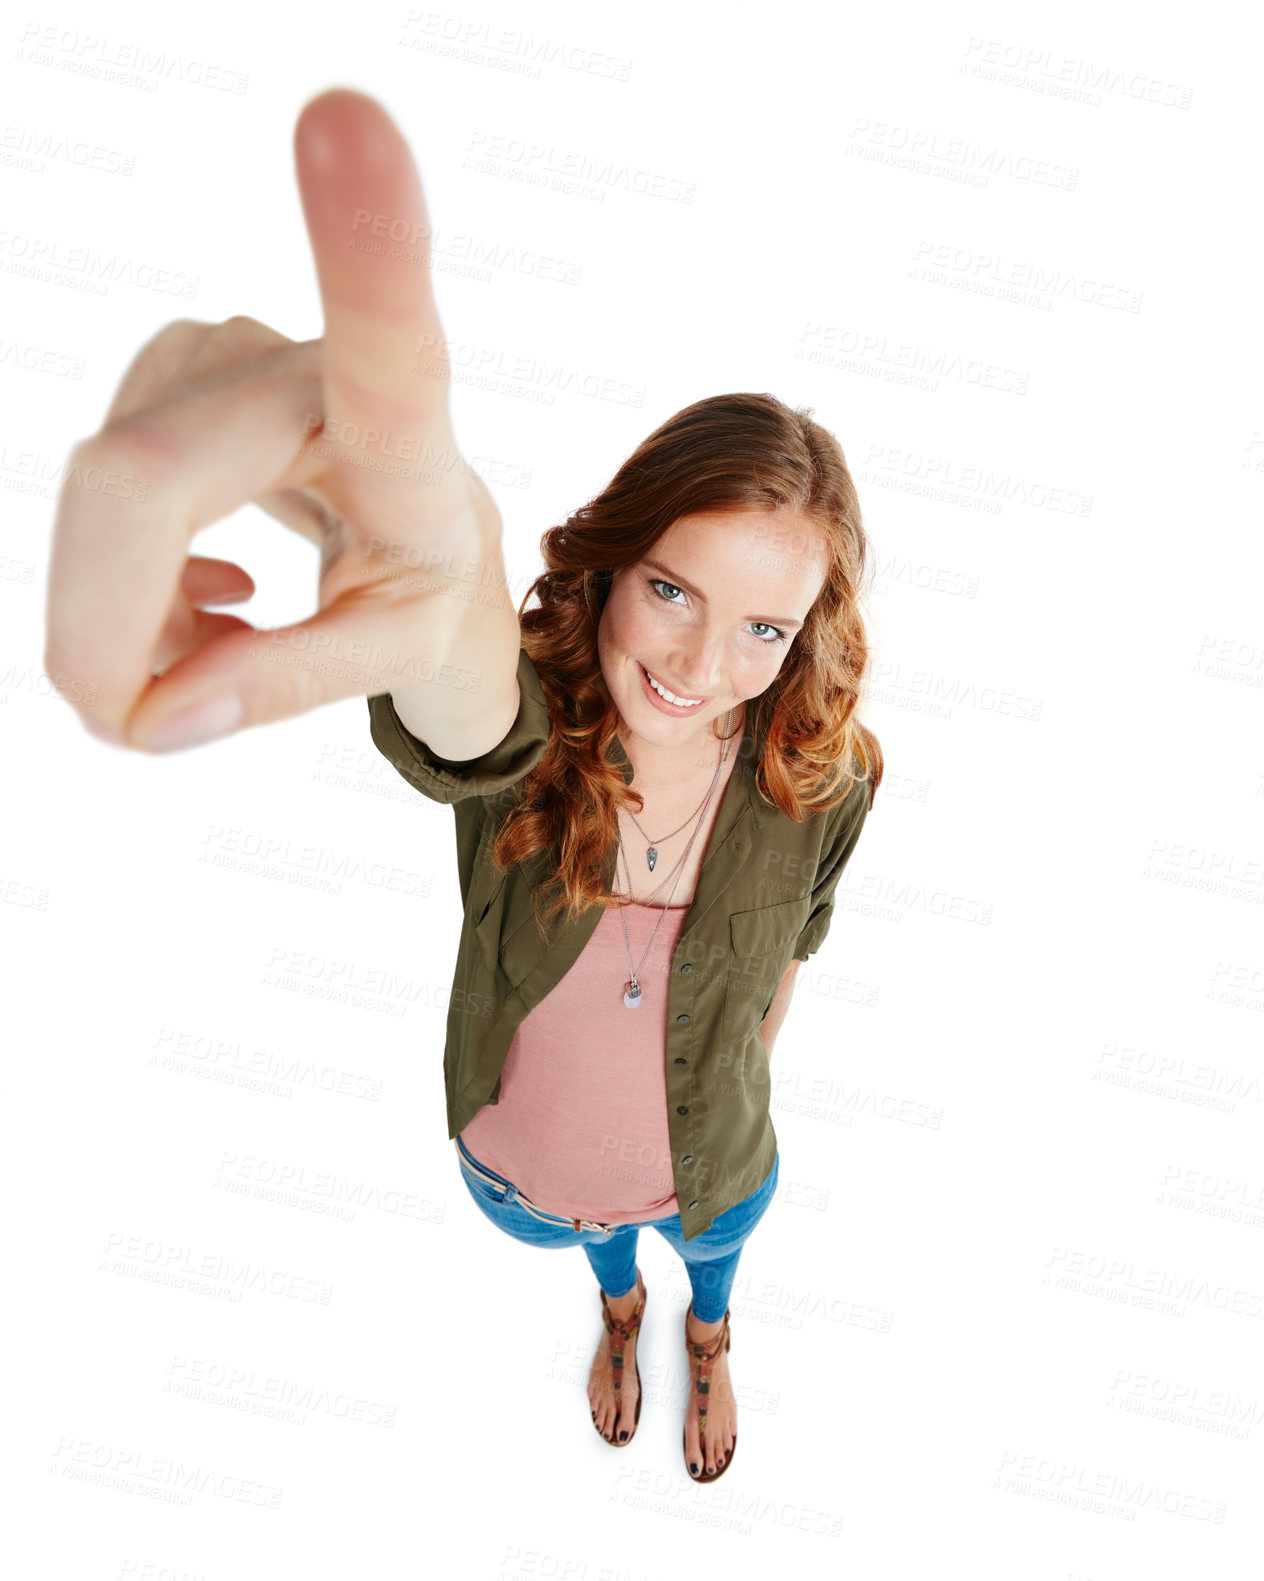 Buy stock photo Shot of a young woman pointing against a white background